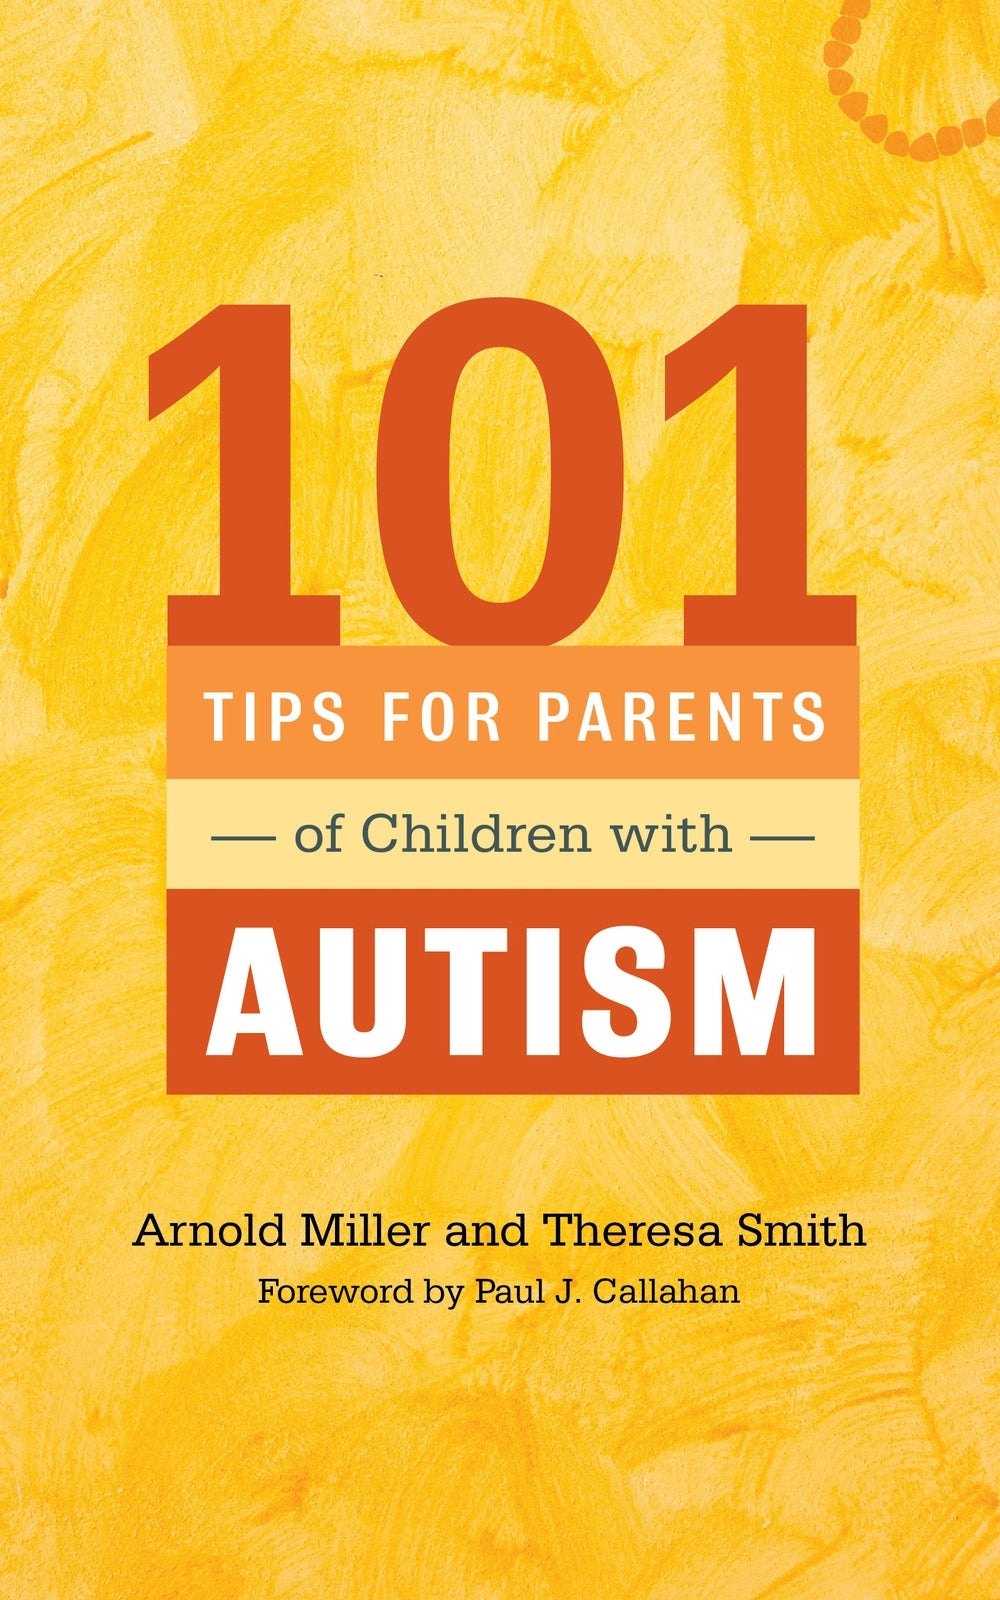 101 Tips for Parents of Children with Autism by Ethan B. Miller, Paul J. Callahan, Theresa Smith, Arnold Miller